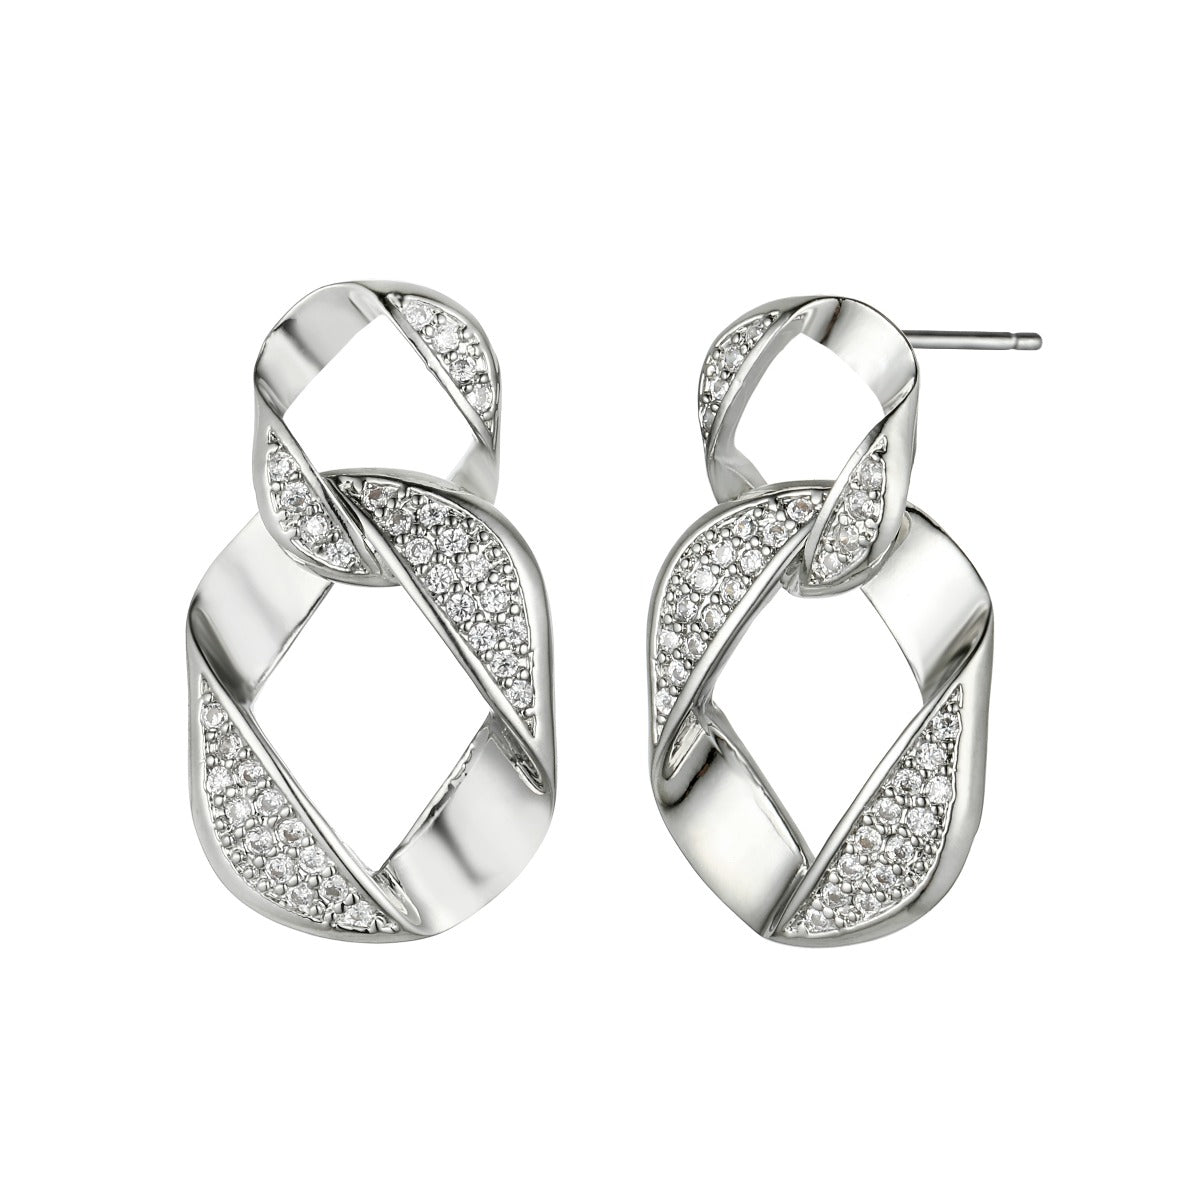 Silver Gold Plated Interlocked Ring Earrings with Diamantes YX12019SLR